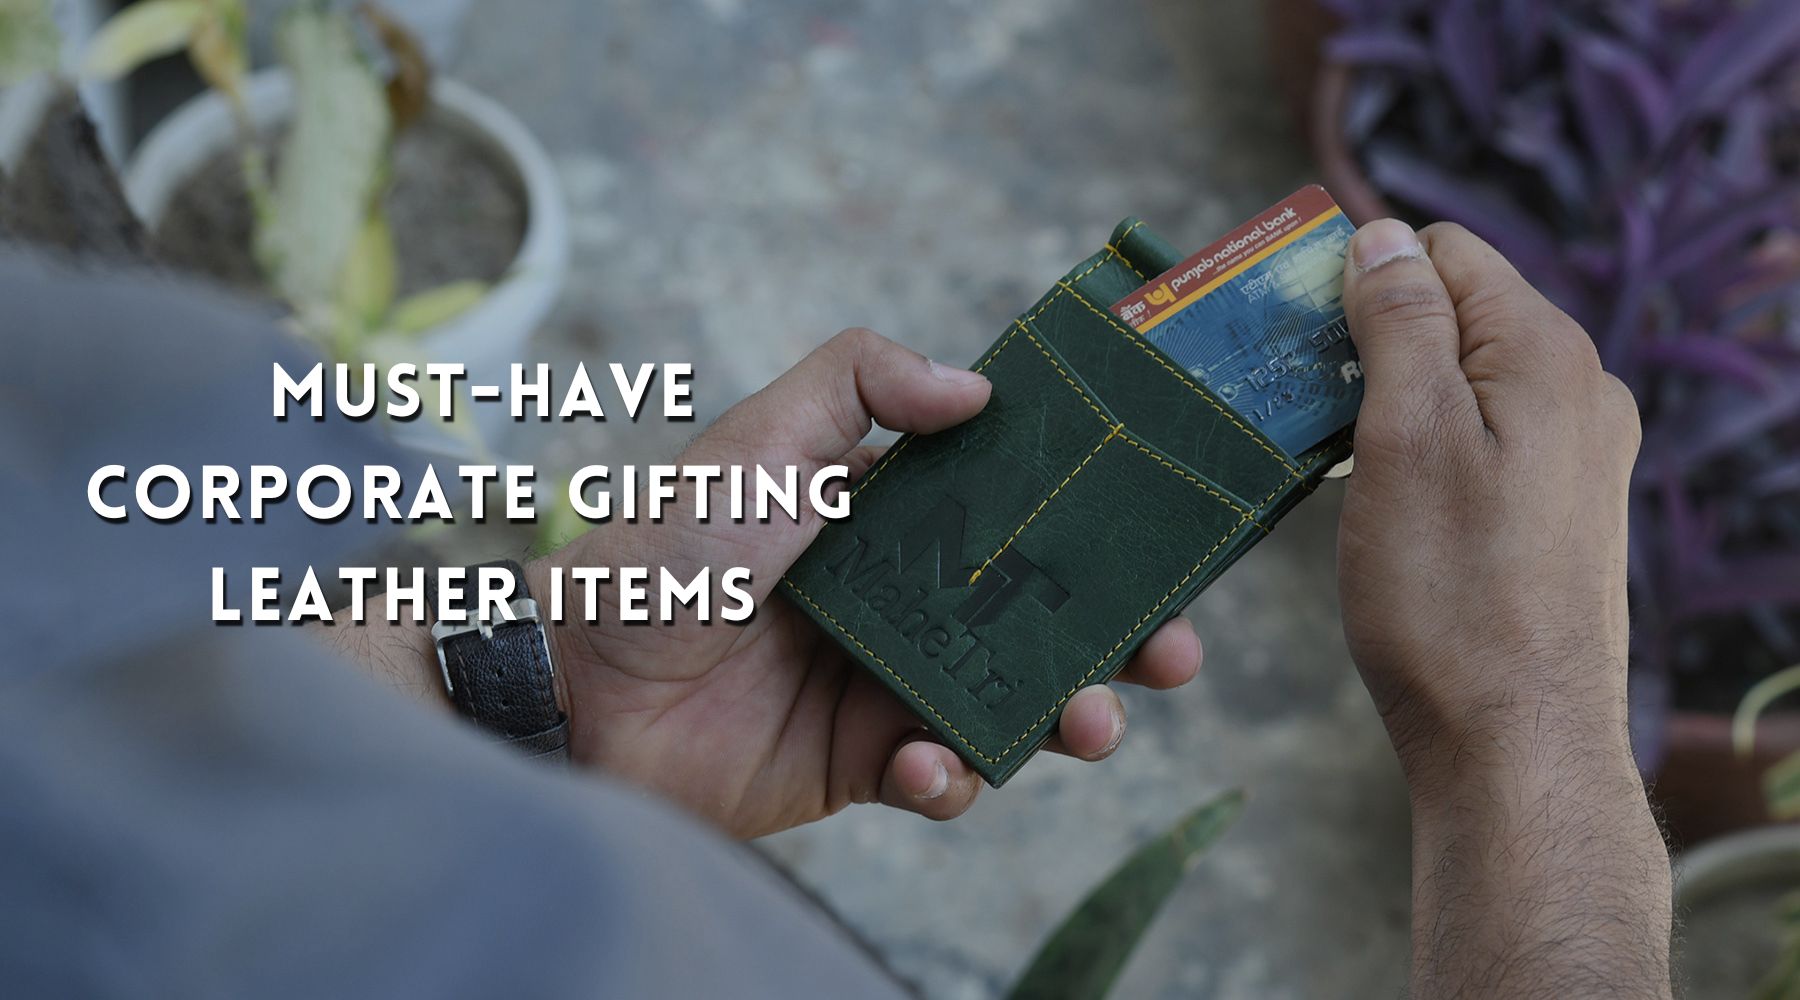 Top 5 Reasonable Leather Items for Corporate Gifting